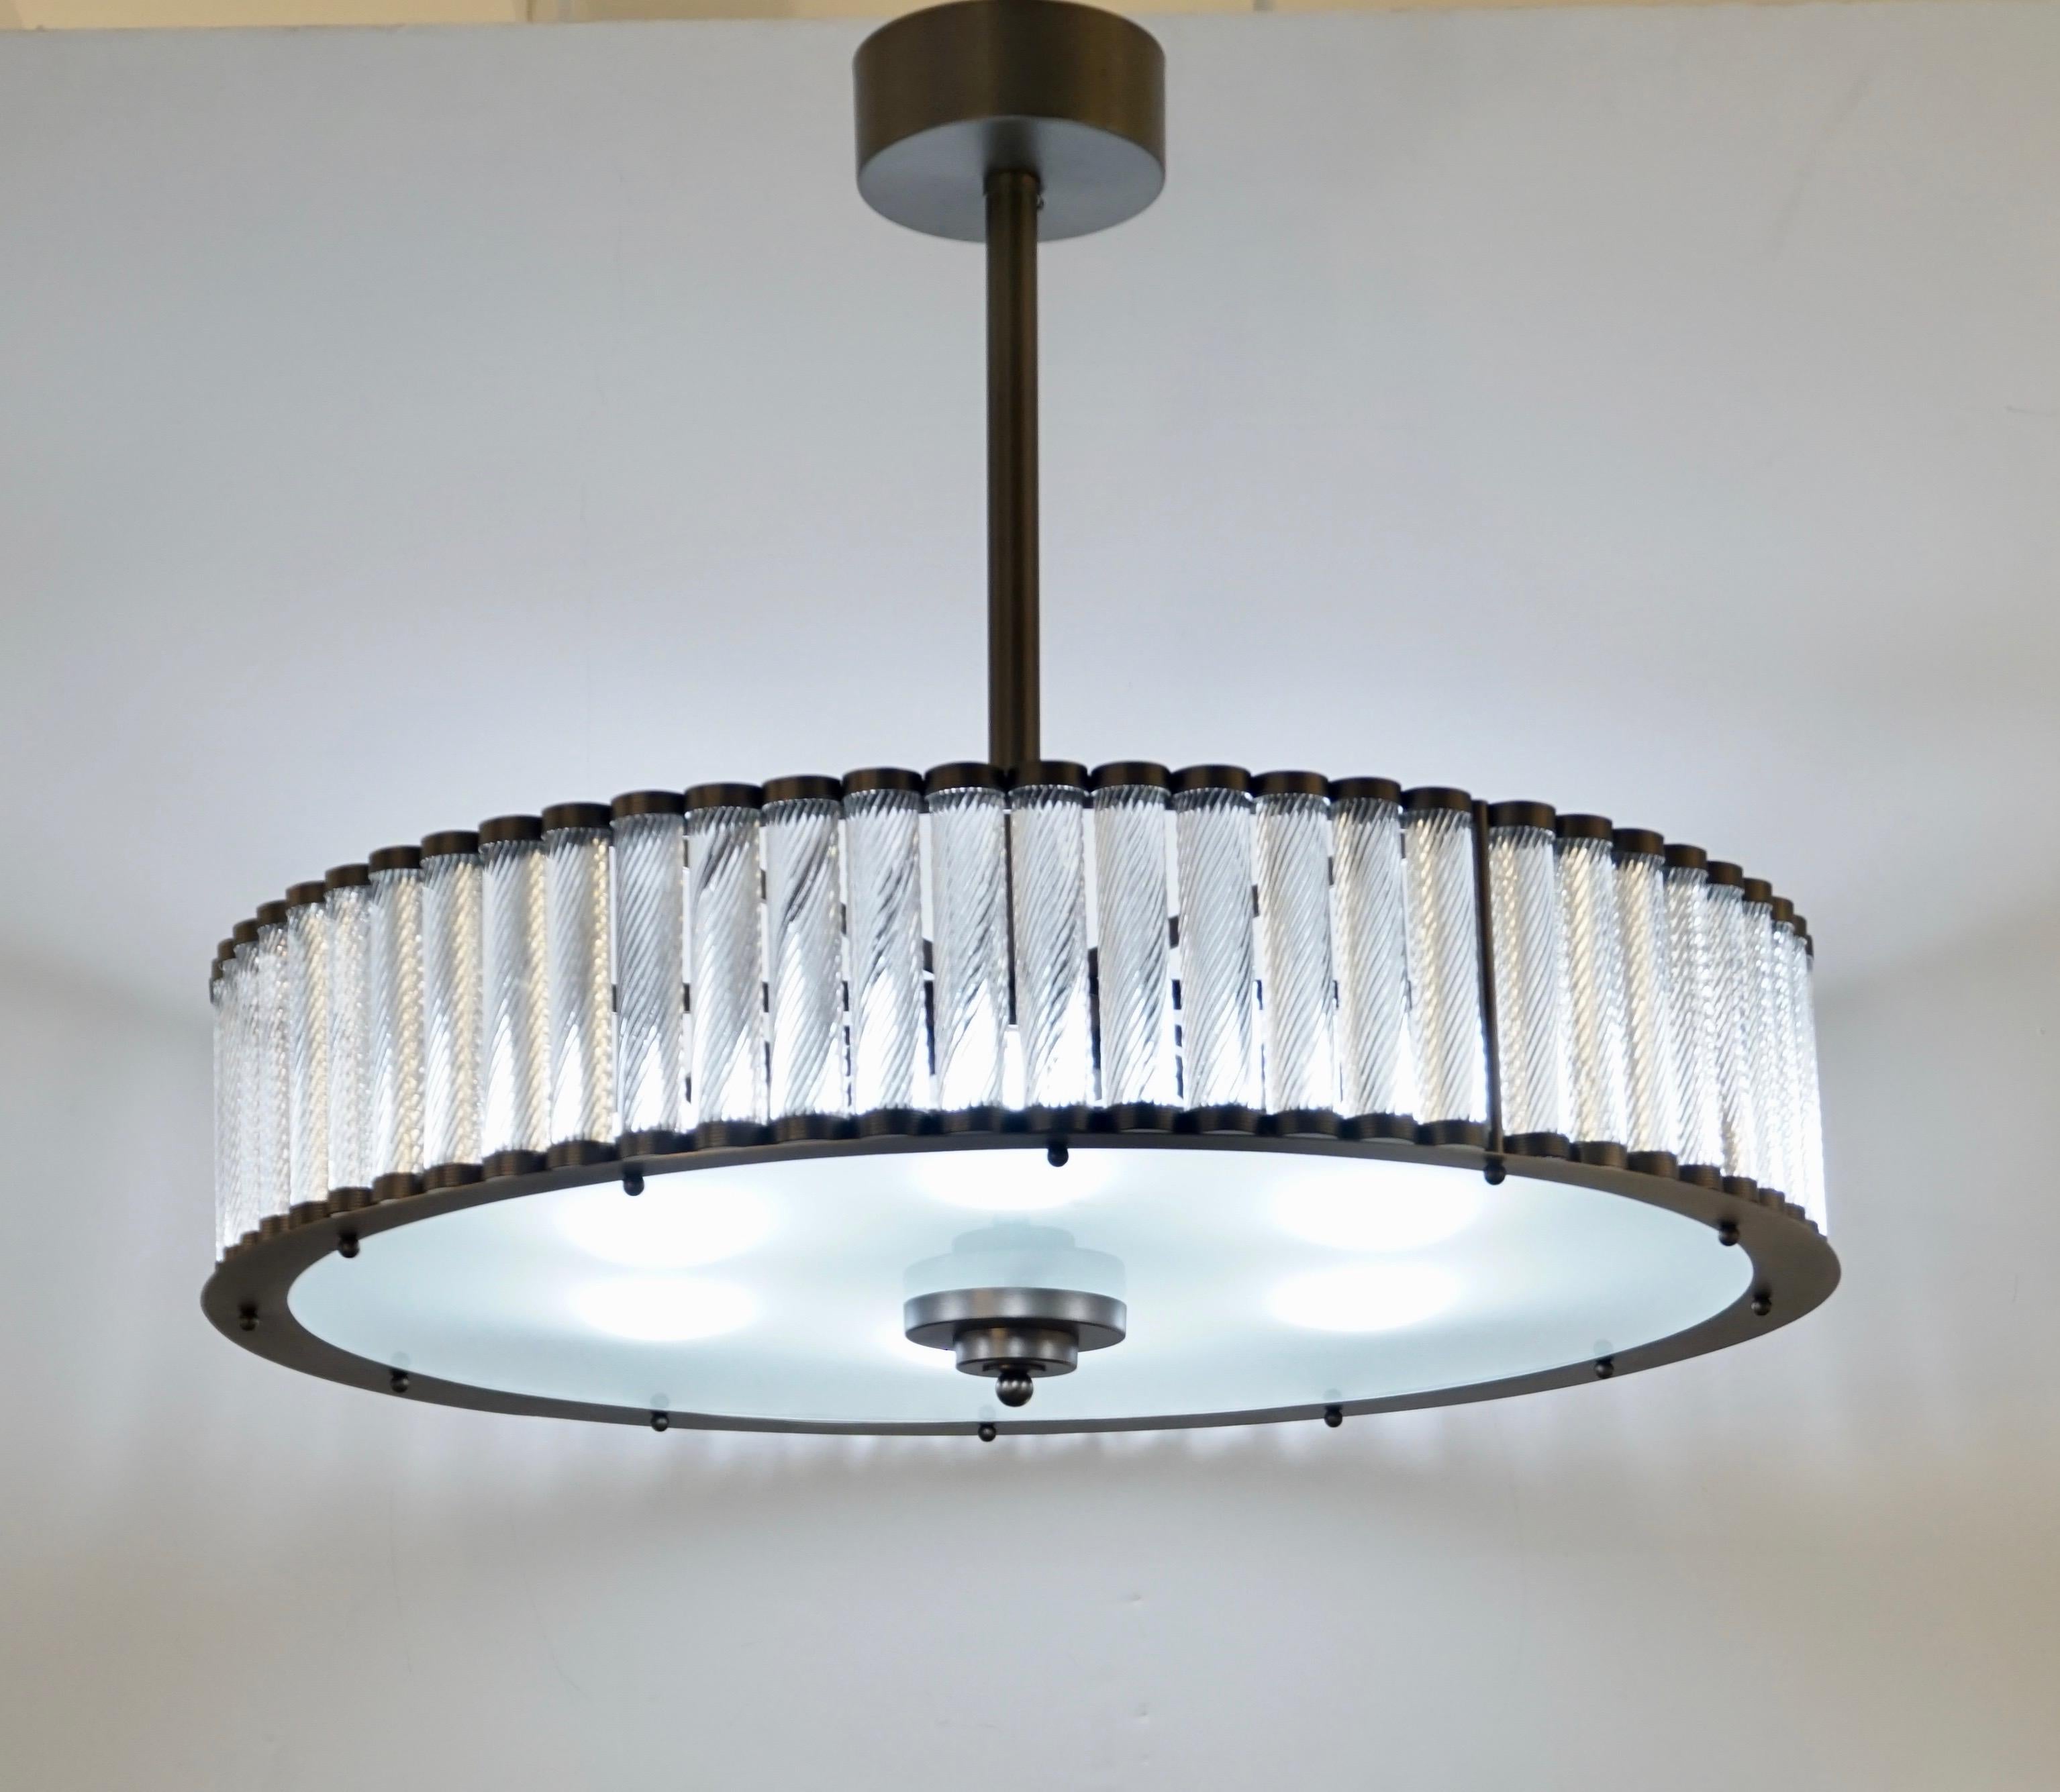 Contemporary Italian Art Deco design customizable round chandelier/pendant of drum shape, entirely handcrafted, with a dark silver steel gunmetal finish. The nicely scalloped airy structure supports crystal clear Murano glass rods, each individually